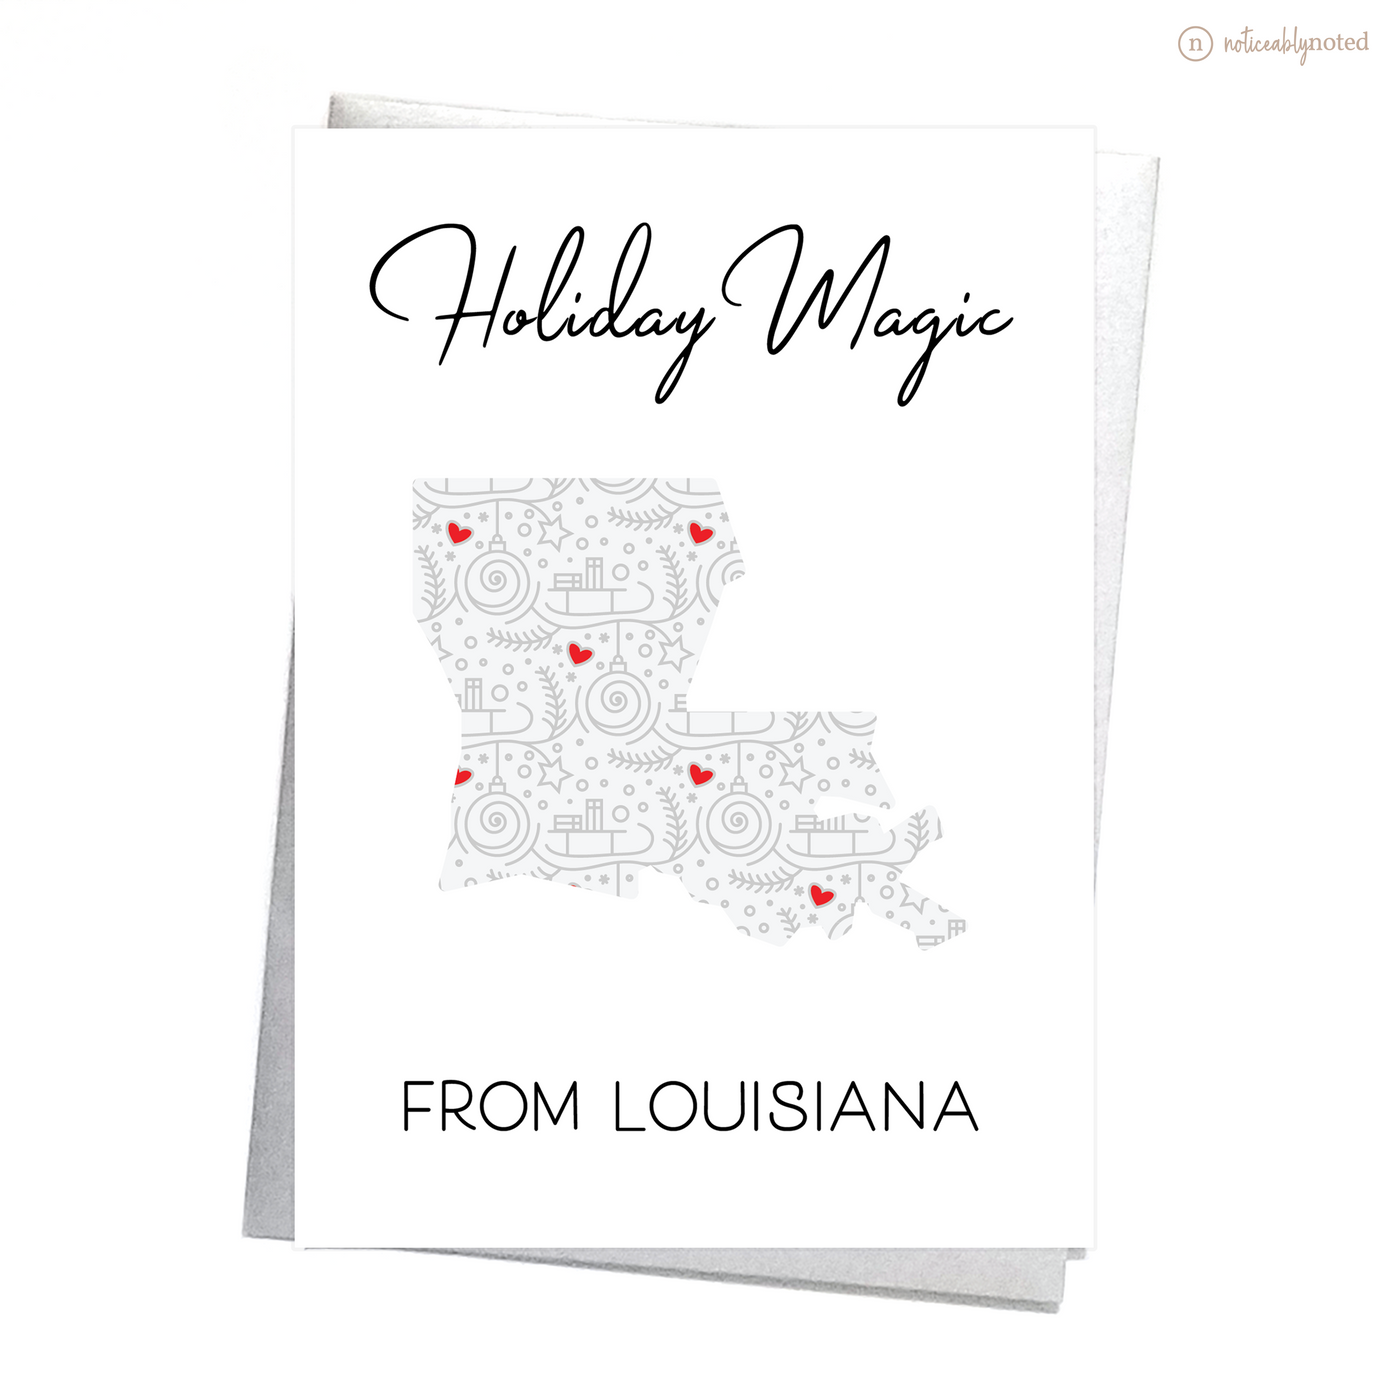 LA Christmas Card | Noticeably Noted